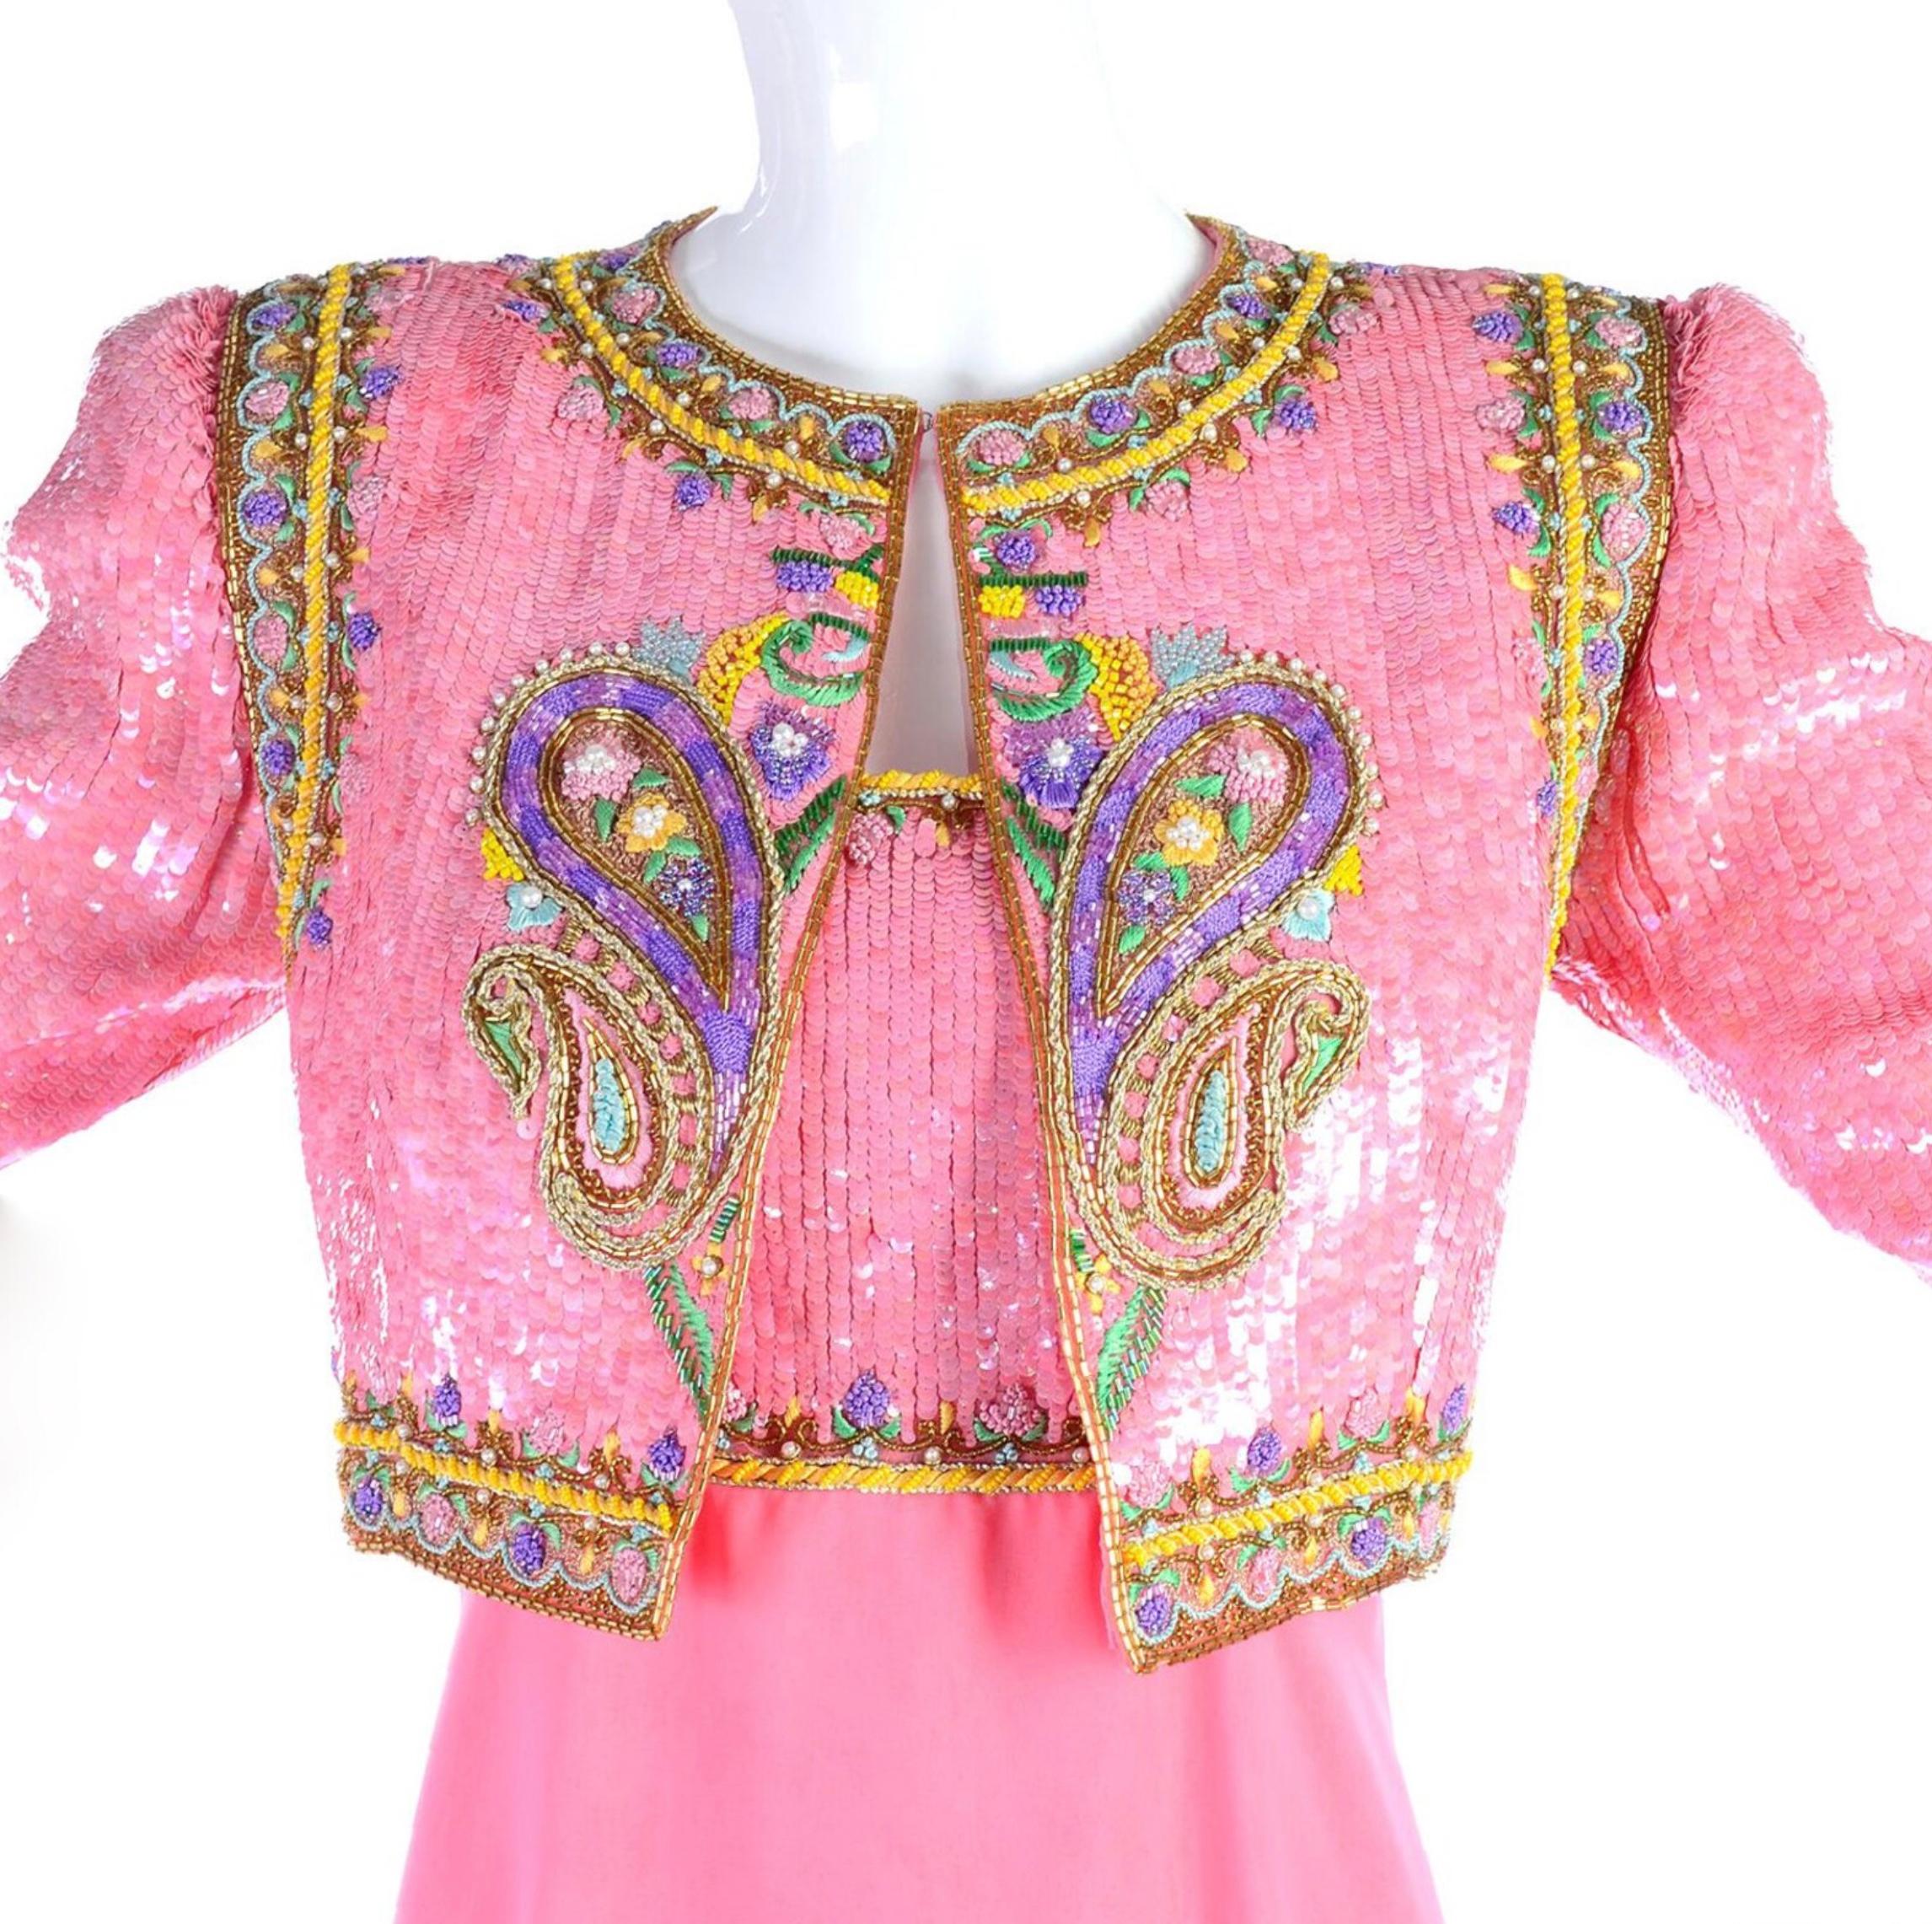 
An amazing piece of art!
1970s glam handmade two piece set of dress + cropped jacket. This is so increrdible just to look at <3
A beautiful midi pink layered chiffon dress with sequined bodice. It closes with a hidden zipper on the back. The